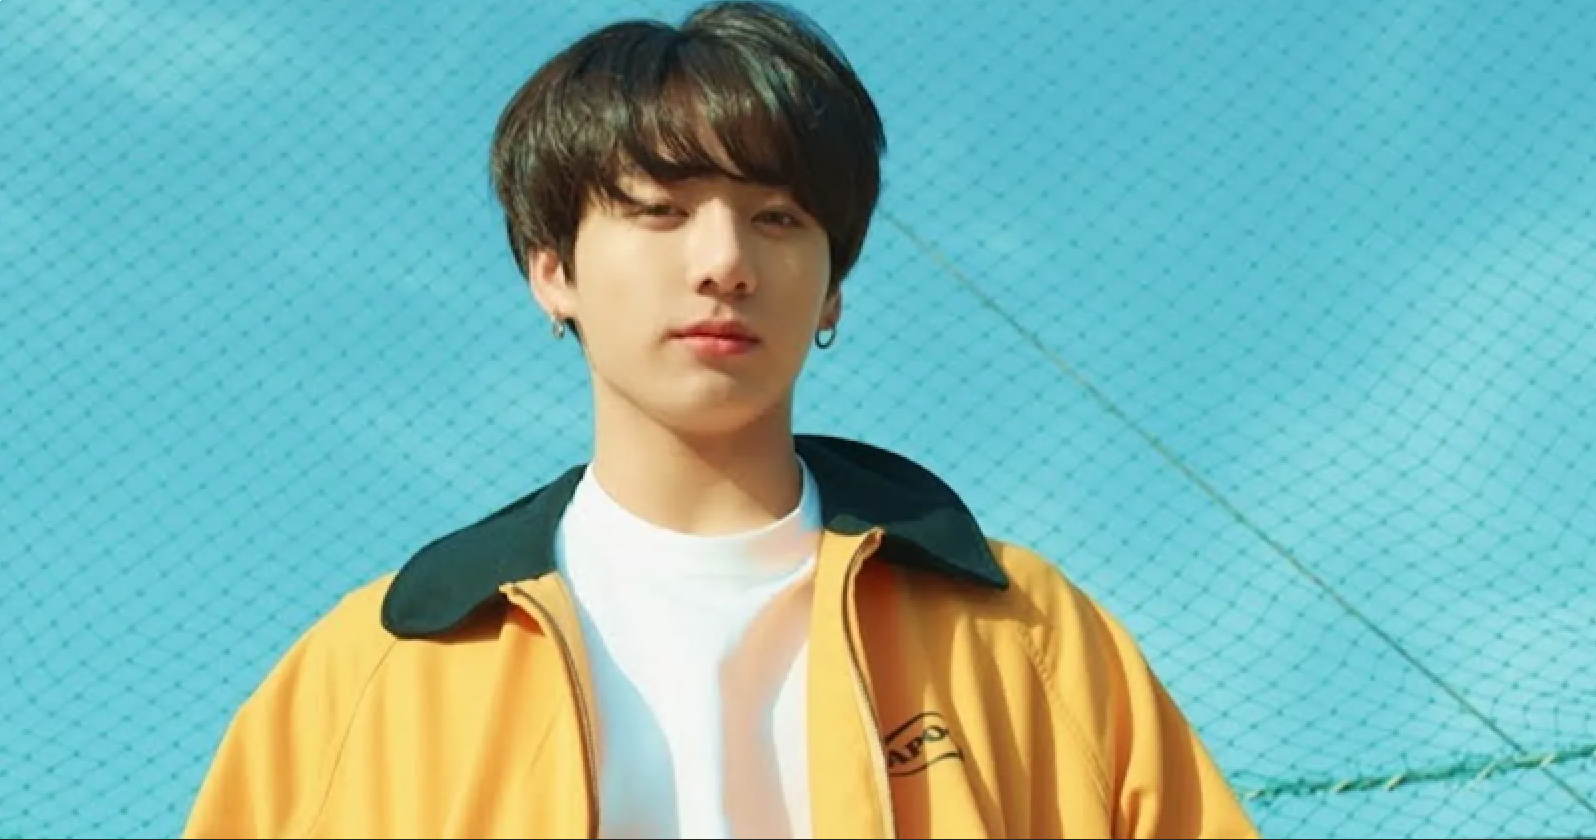 BTS Jungkook Is First Korean Soloist To Reach 300 Million Streams on Spotify